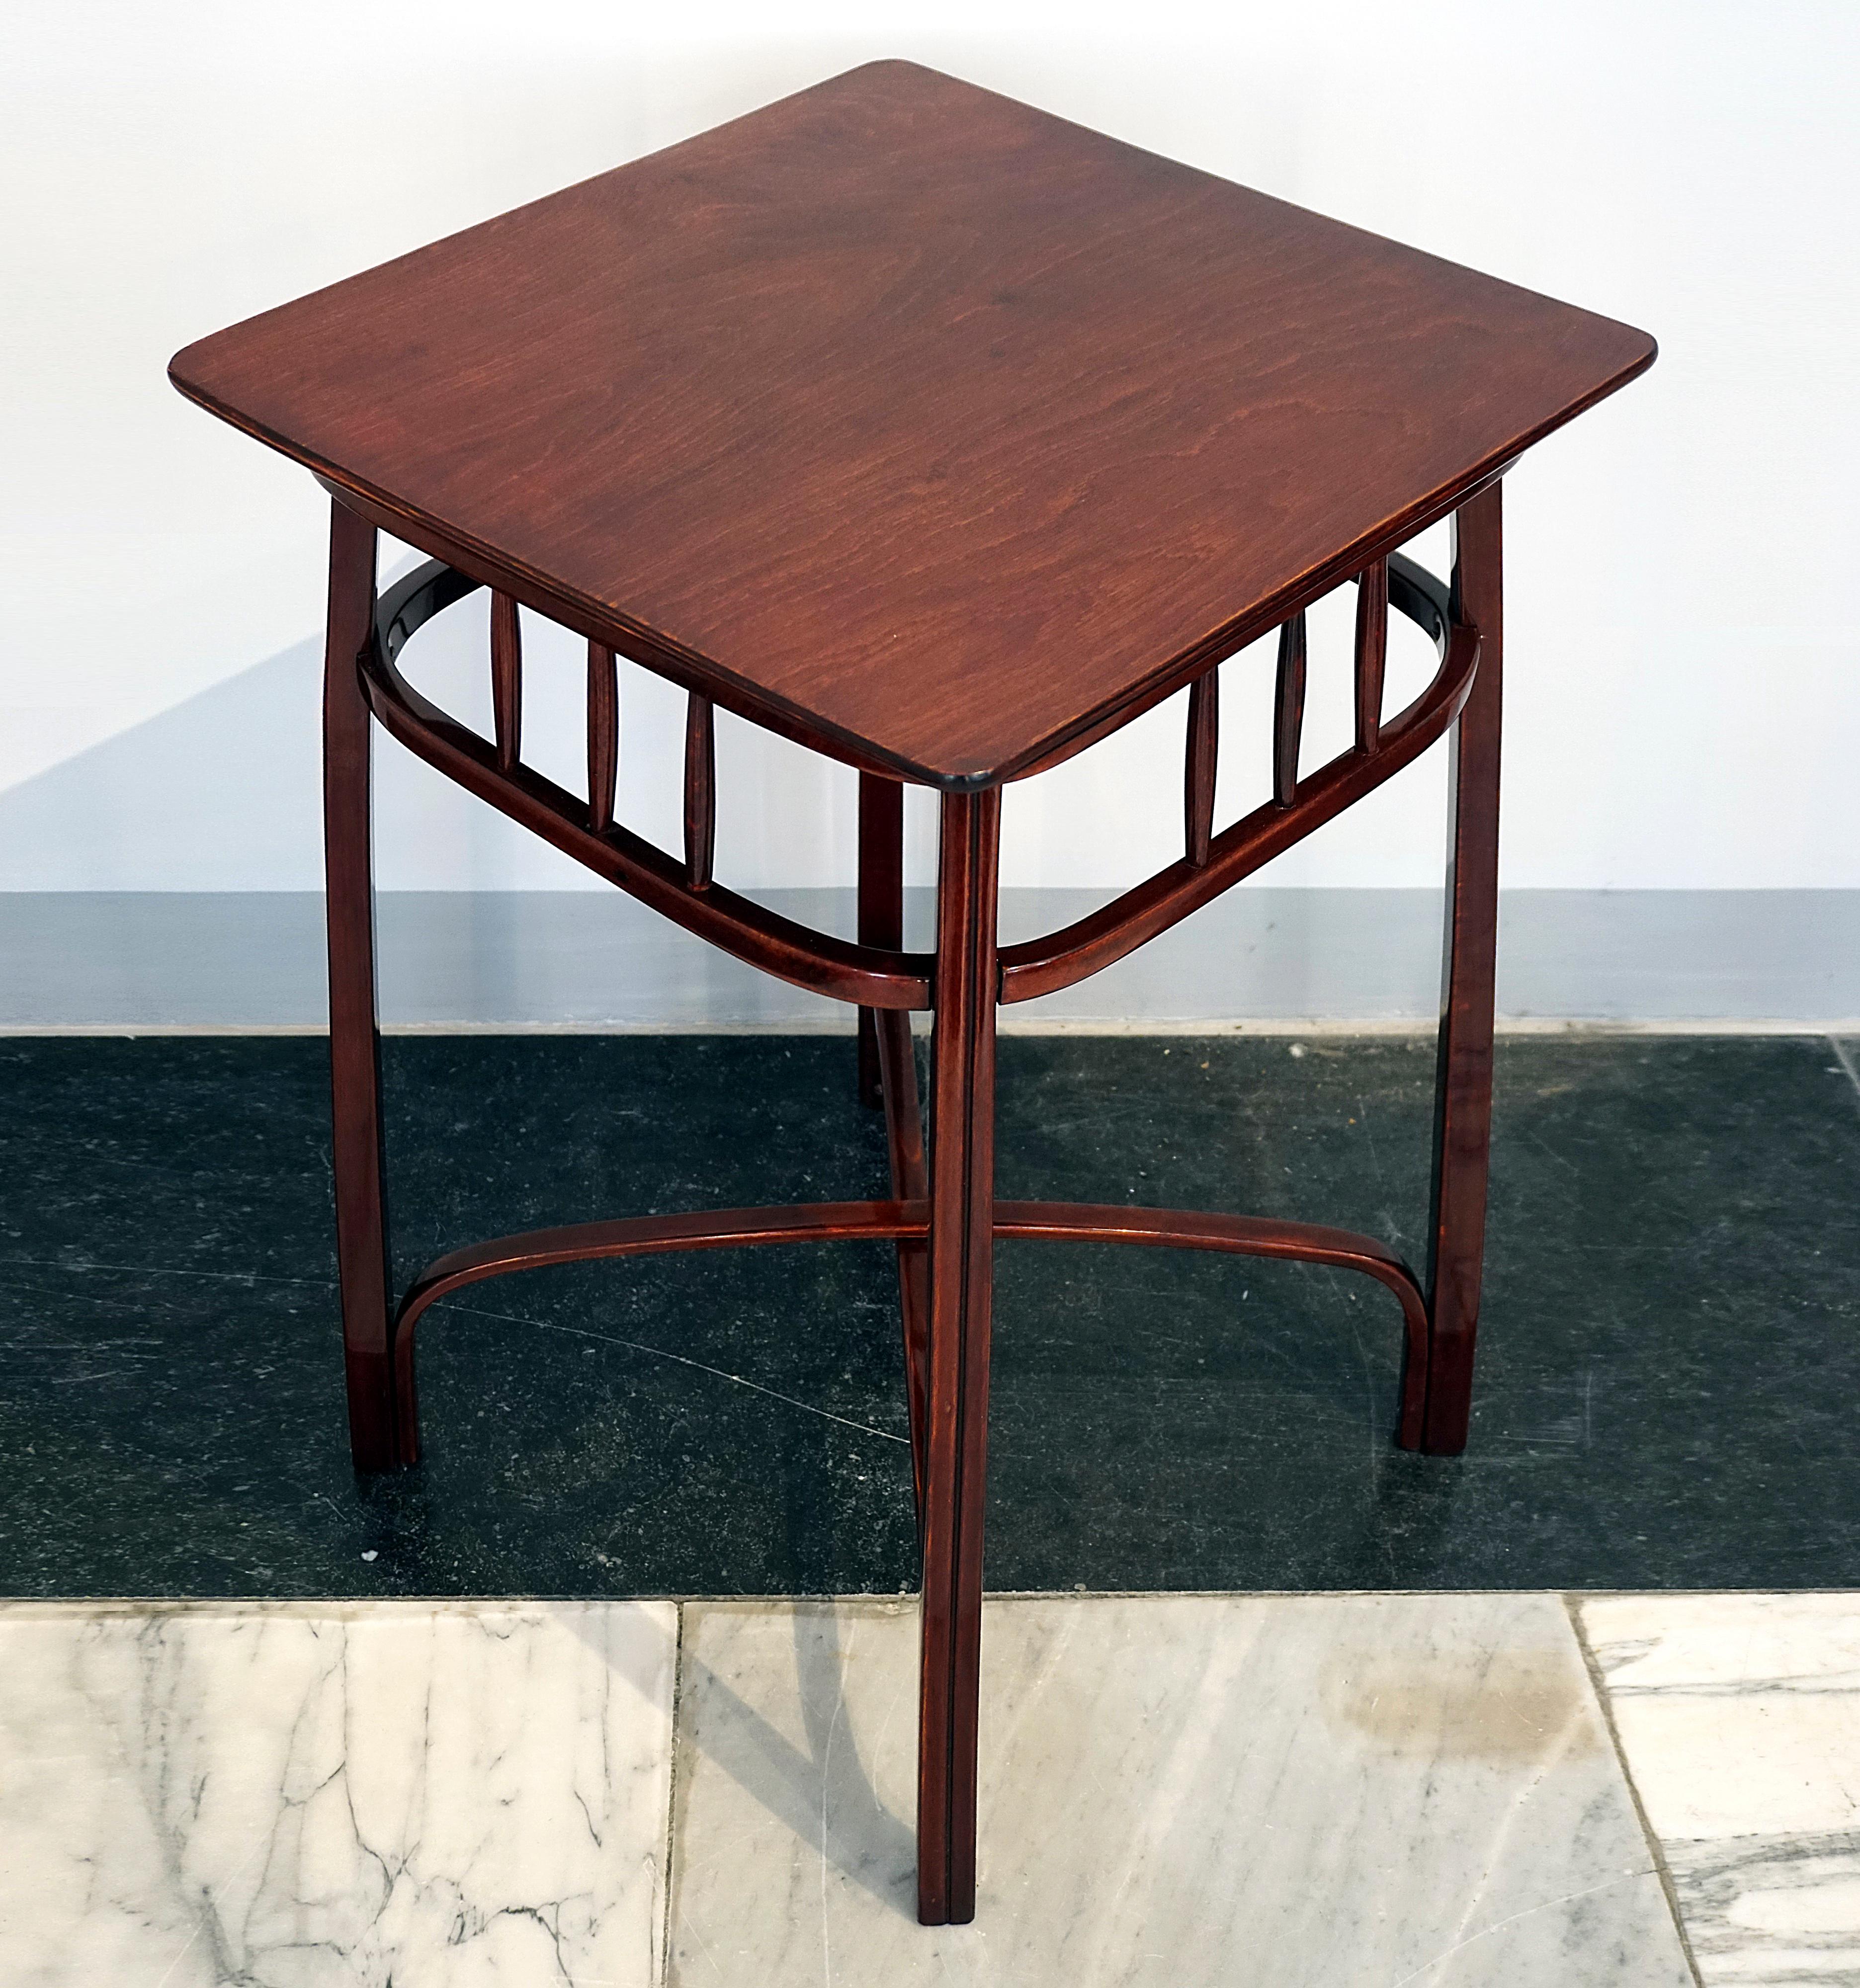 Stained J.&J. Kohn Art Nouveau Waiting Table, Mahogany stained, Austria, Around 1905 For Sale